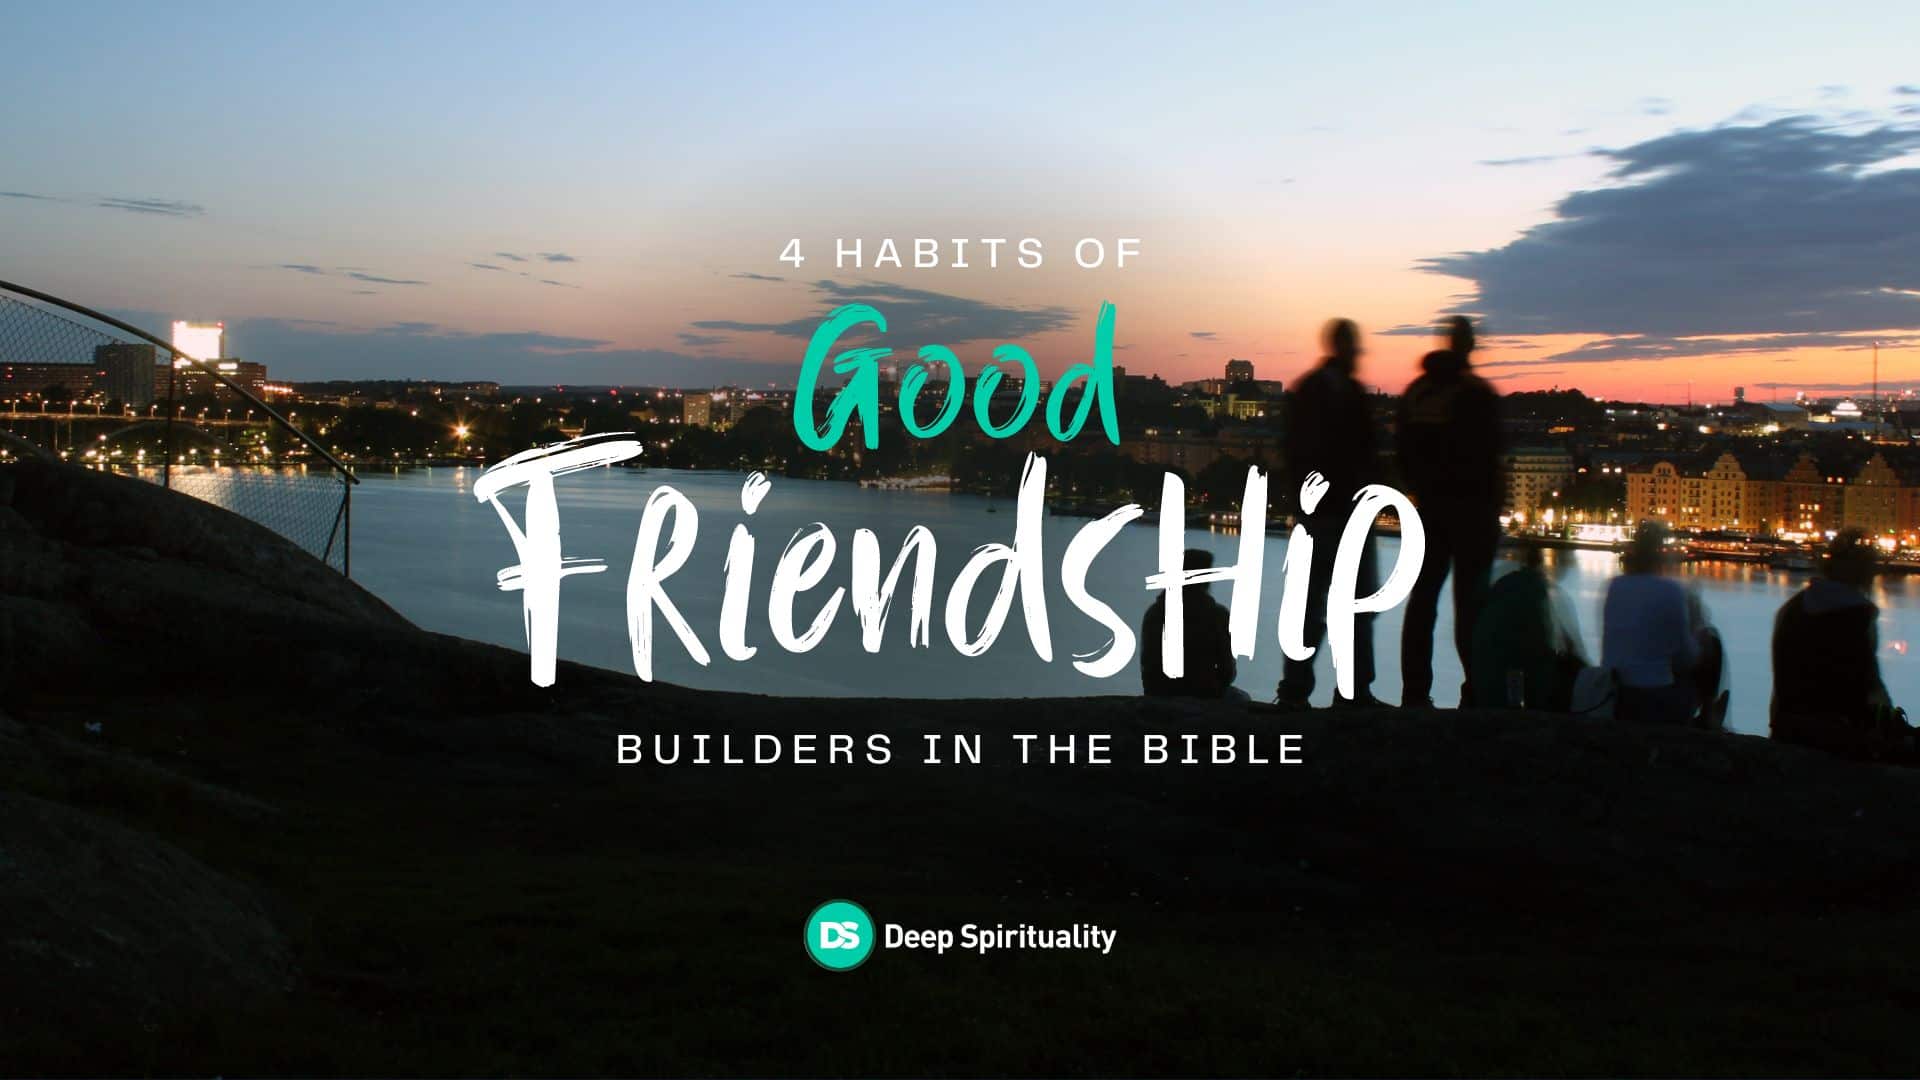 4 Habits to Build if You Want Good Friendships, According to the Bible 1